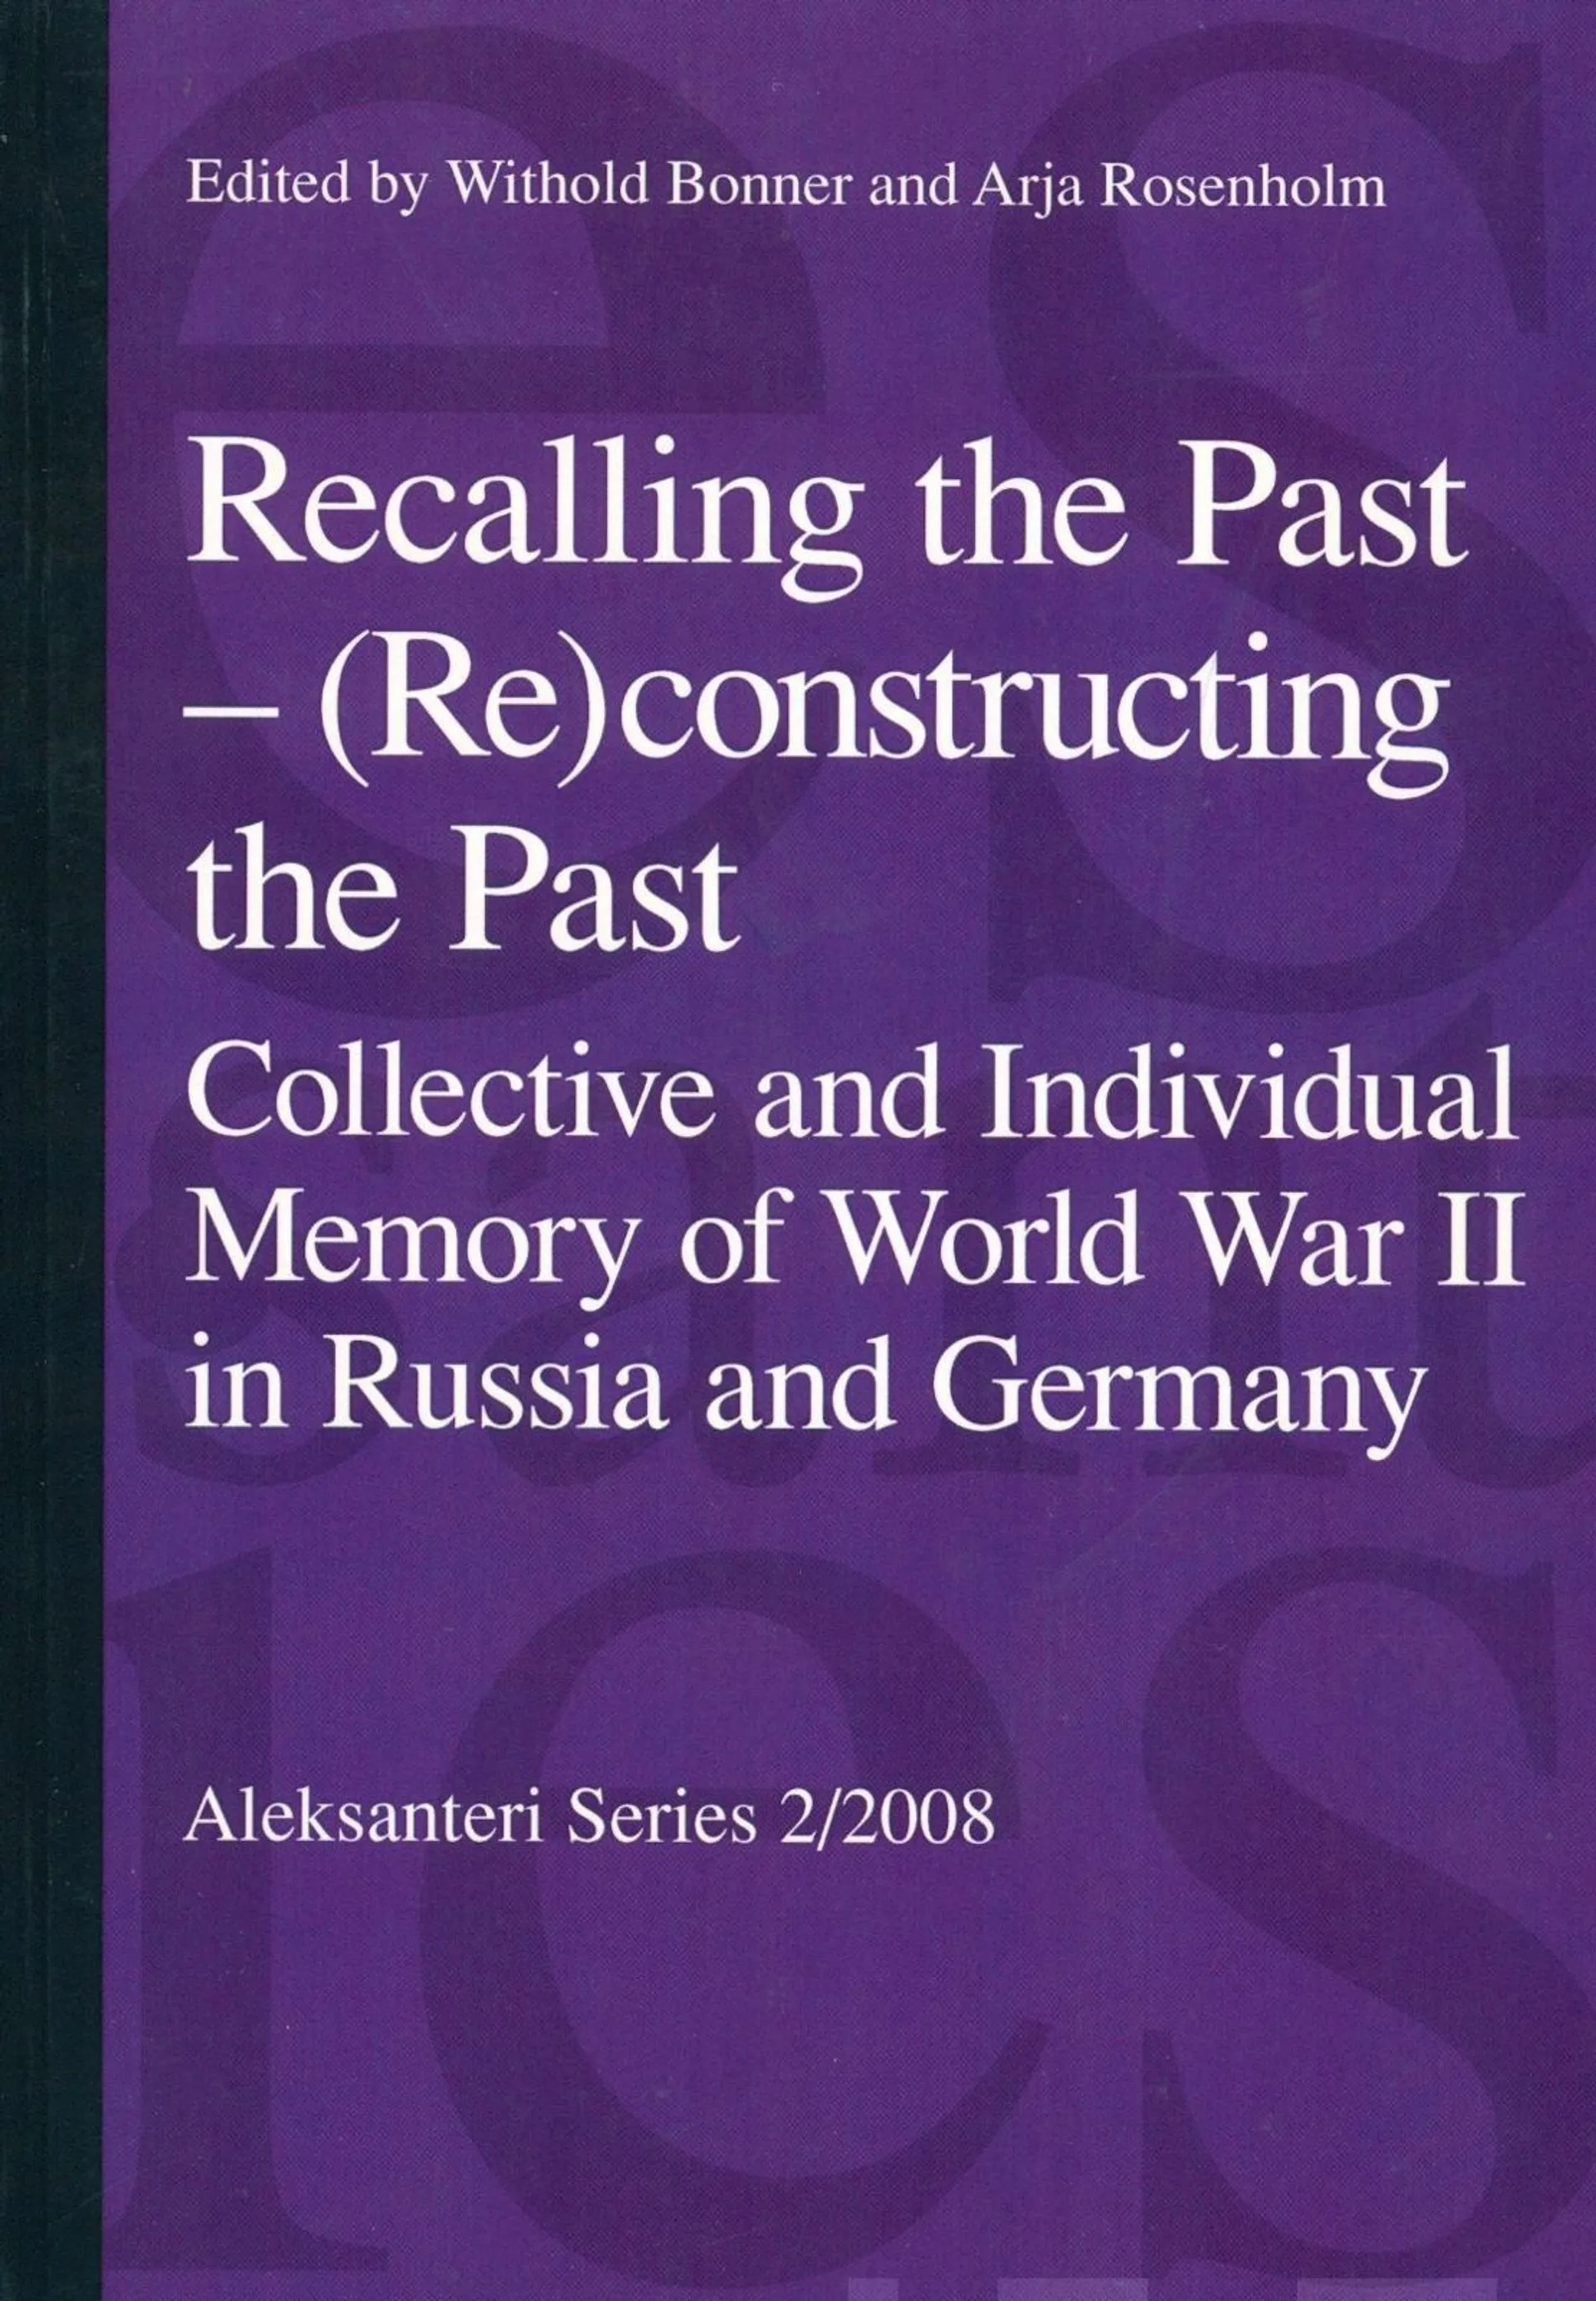 Bonner, Recalling the past - (Re)constructing the past